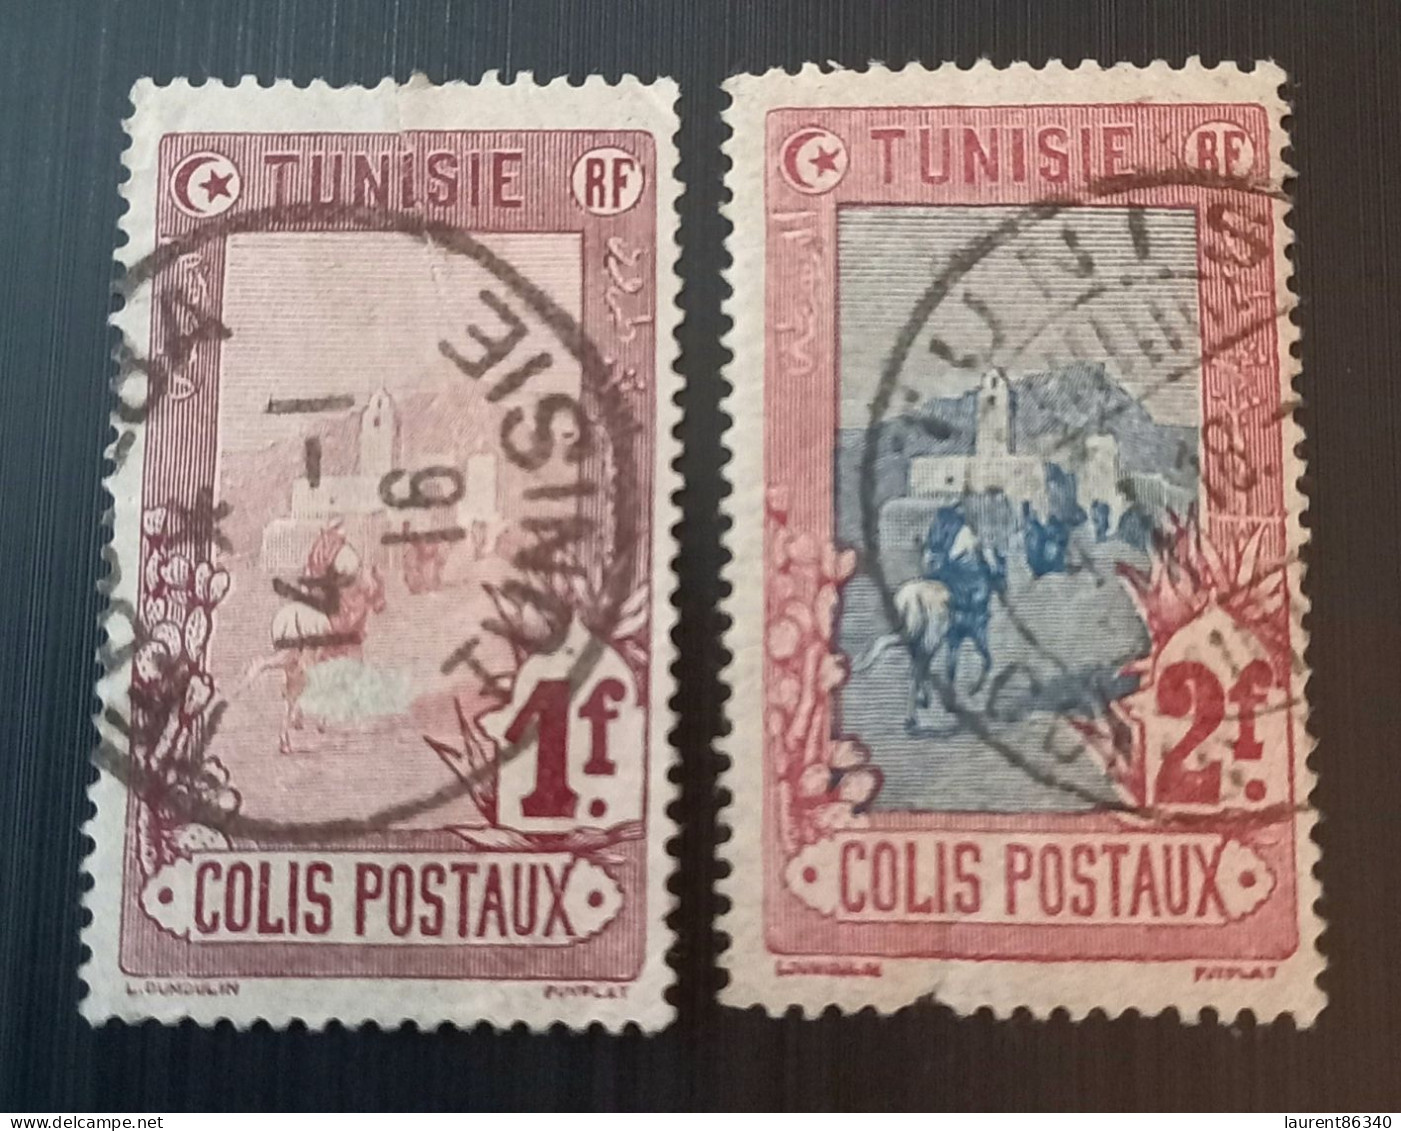 Tunisie 1906 Parcel Post Stamps - Timbres Colis Postaux (1906 – 1926) Lot 2 - Used Stamps